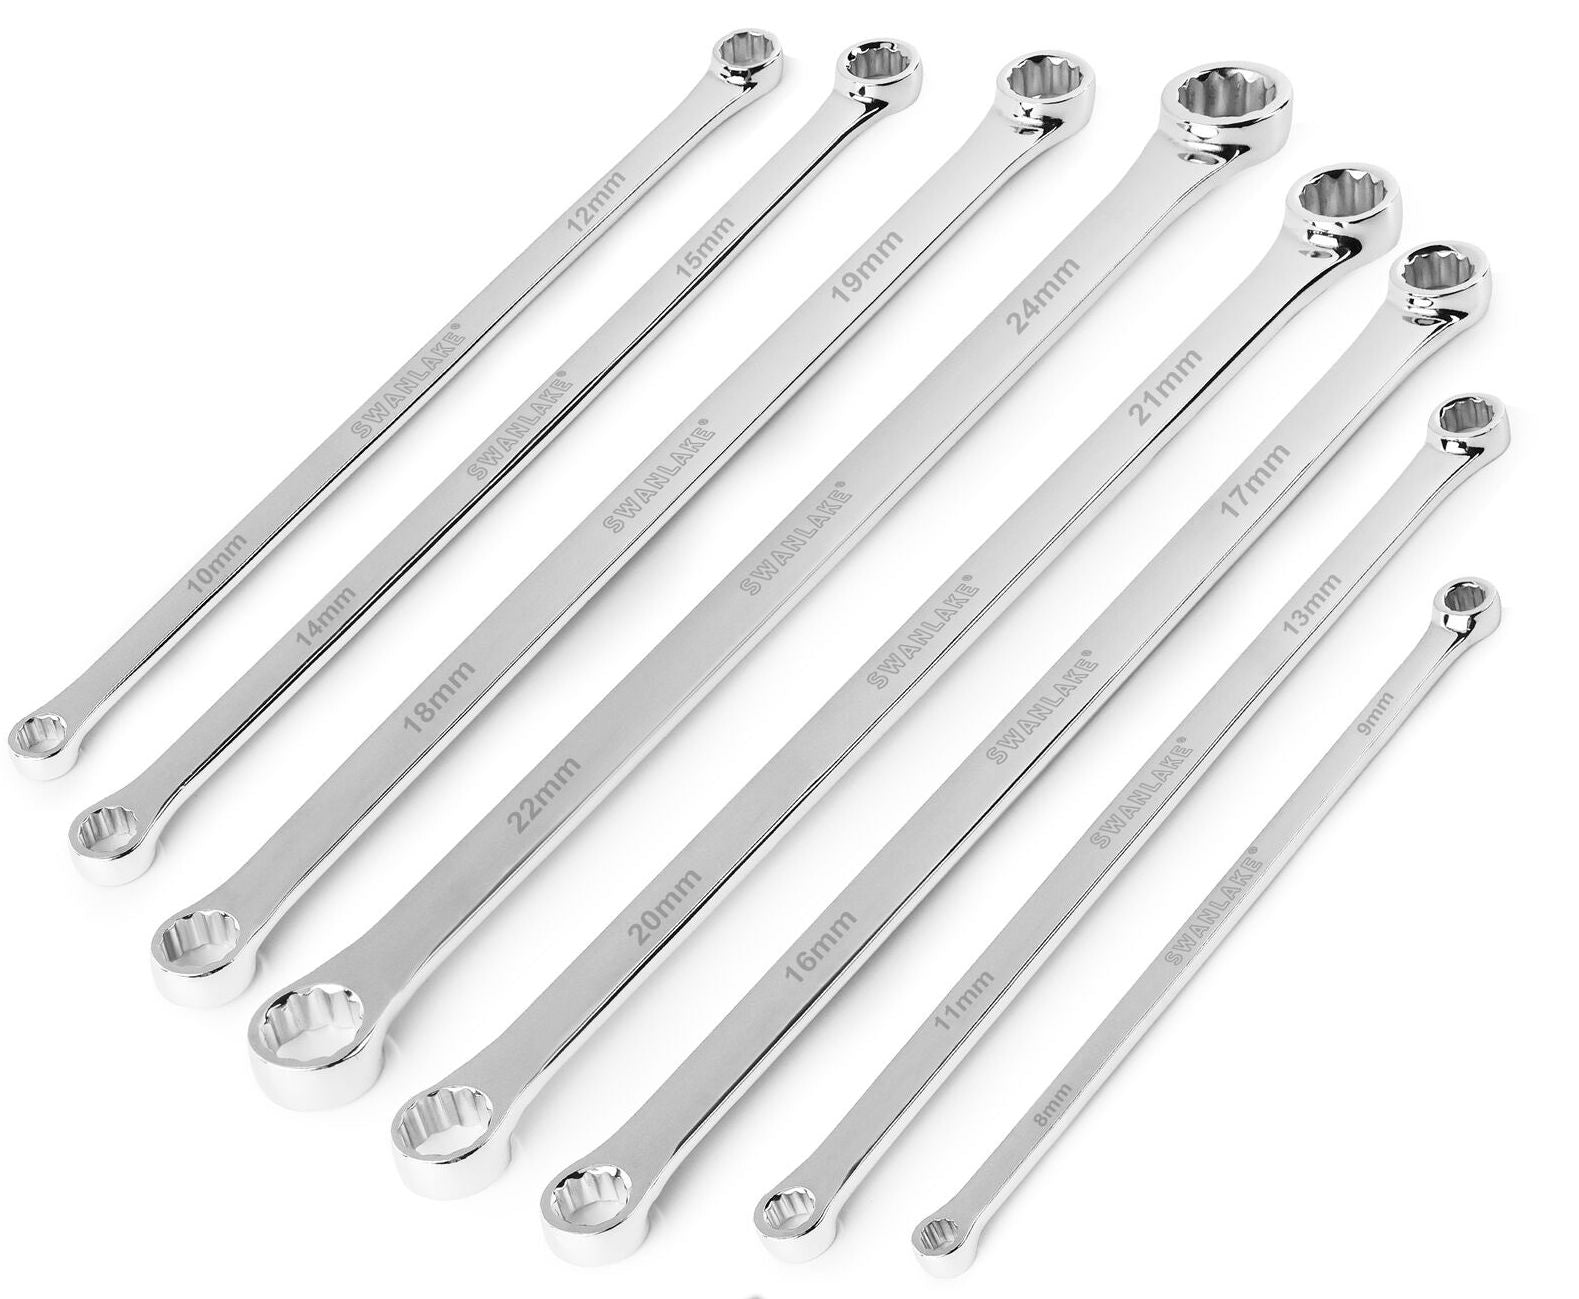 8 Pcs Extra Long Double Box End Wrench Set 8 - 24mm Aviation Spanner W –  German Audio Tech